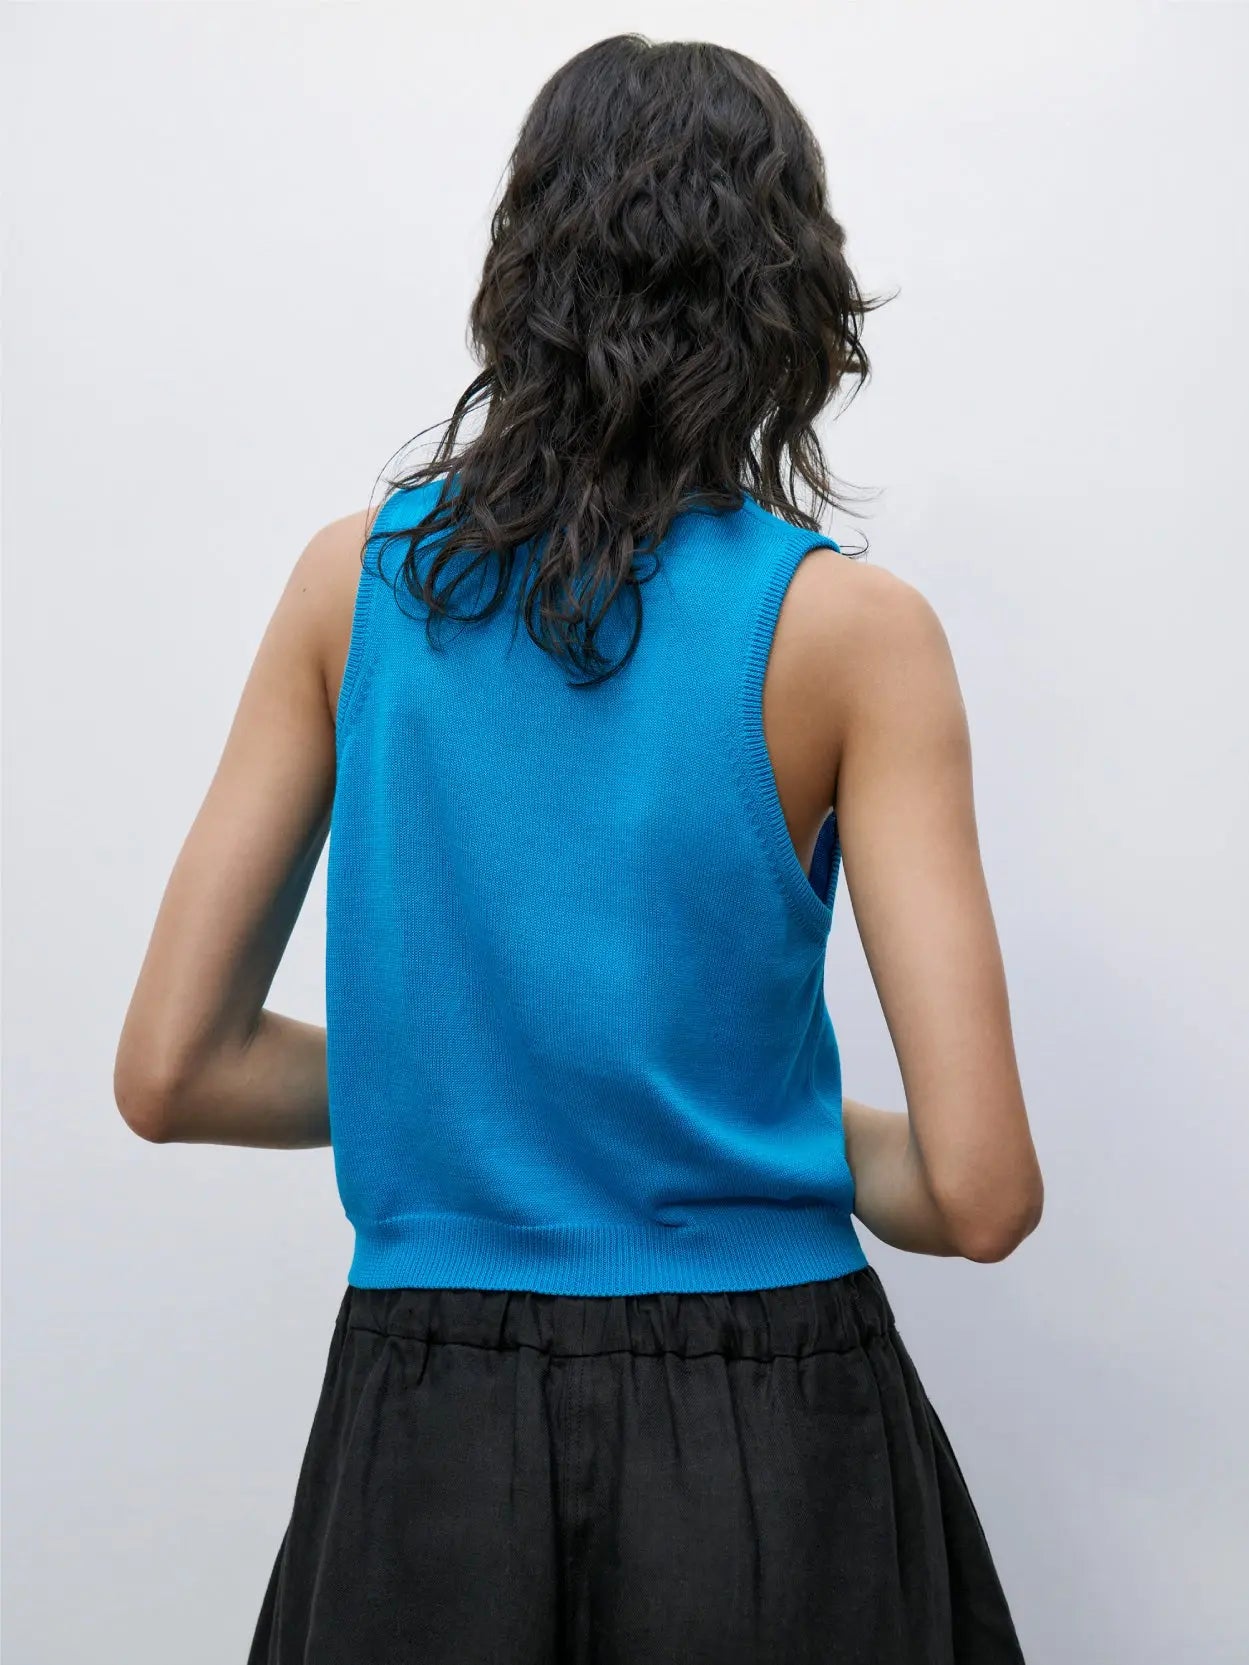 A Cotton Cropped Tank Top Ceruleo with a round neckline, crafted from a knit fabric. A small off-white label with black text "Cordera" is visible on the inside back of the neck. The top is displayed against a plain white background, available exclusively at Bassal Store in Barcelona.